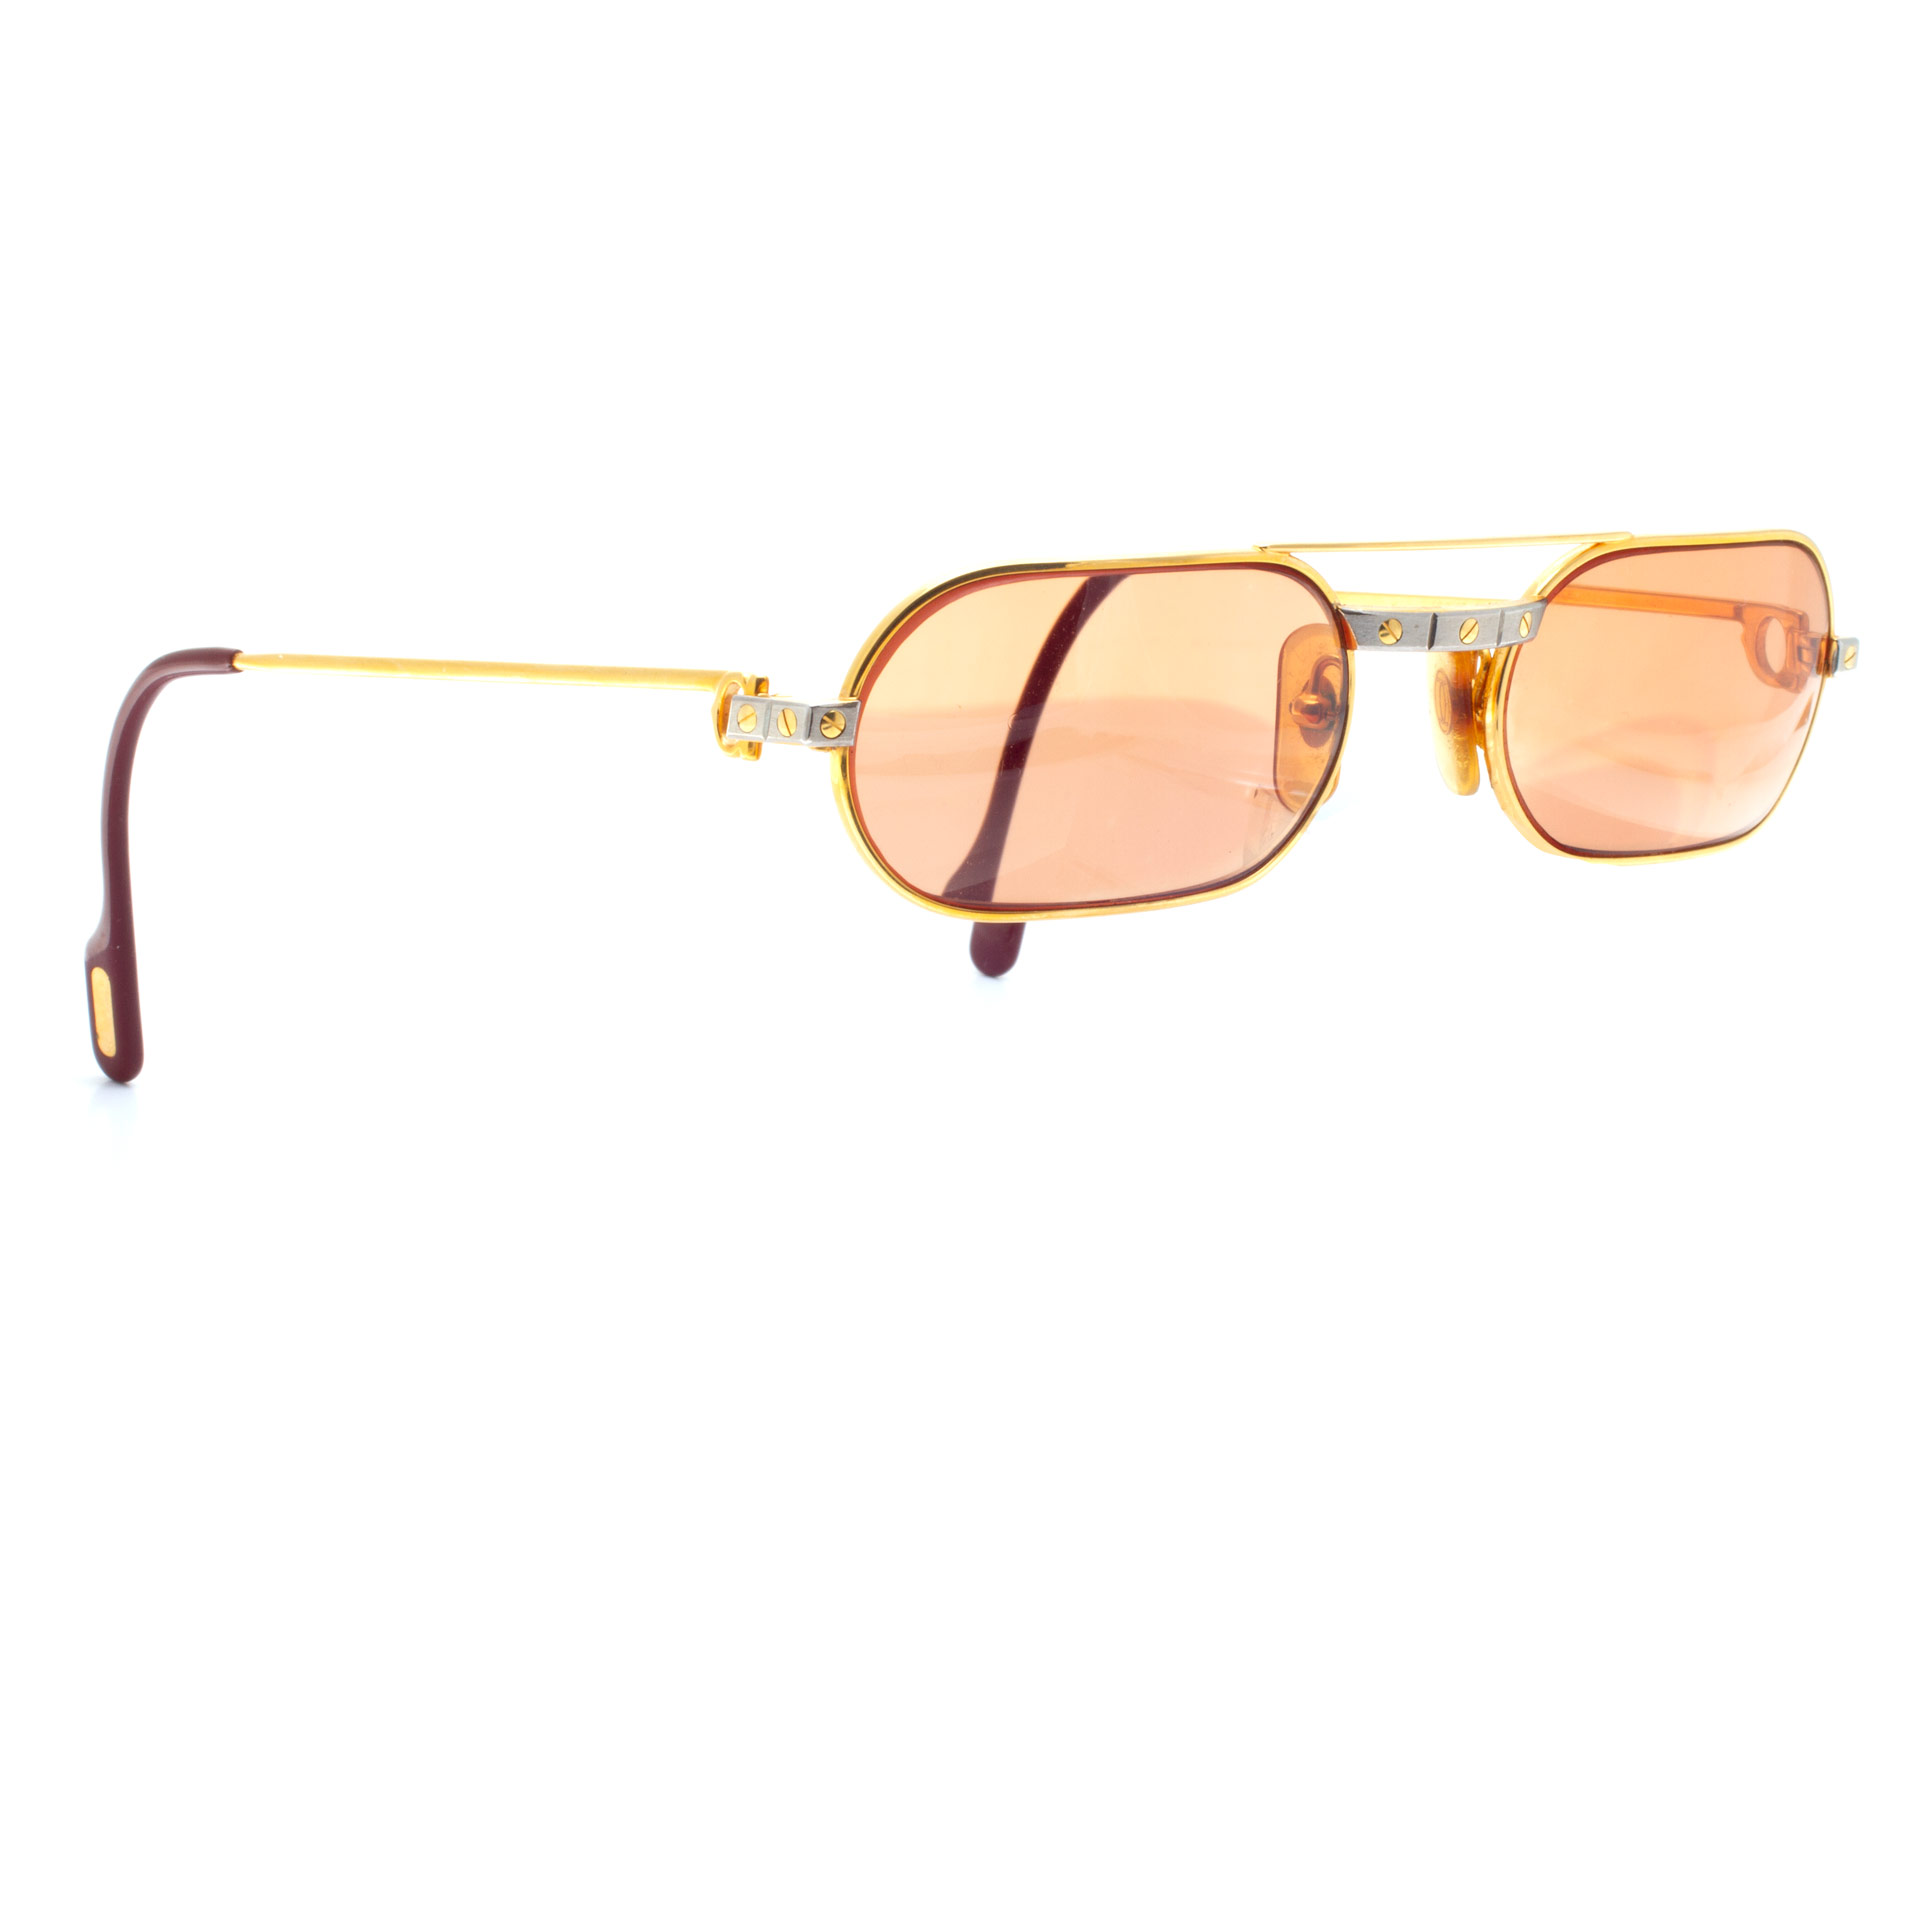 Cartier Santos glasses in gold plate image 4